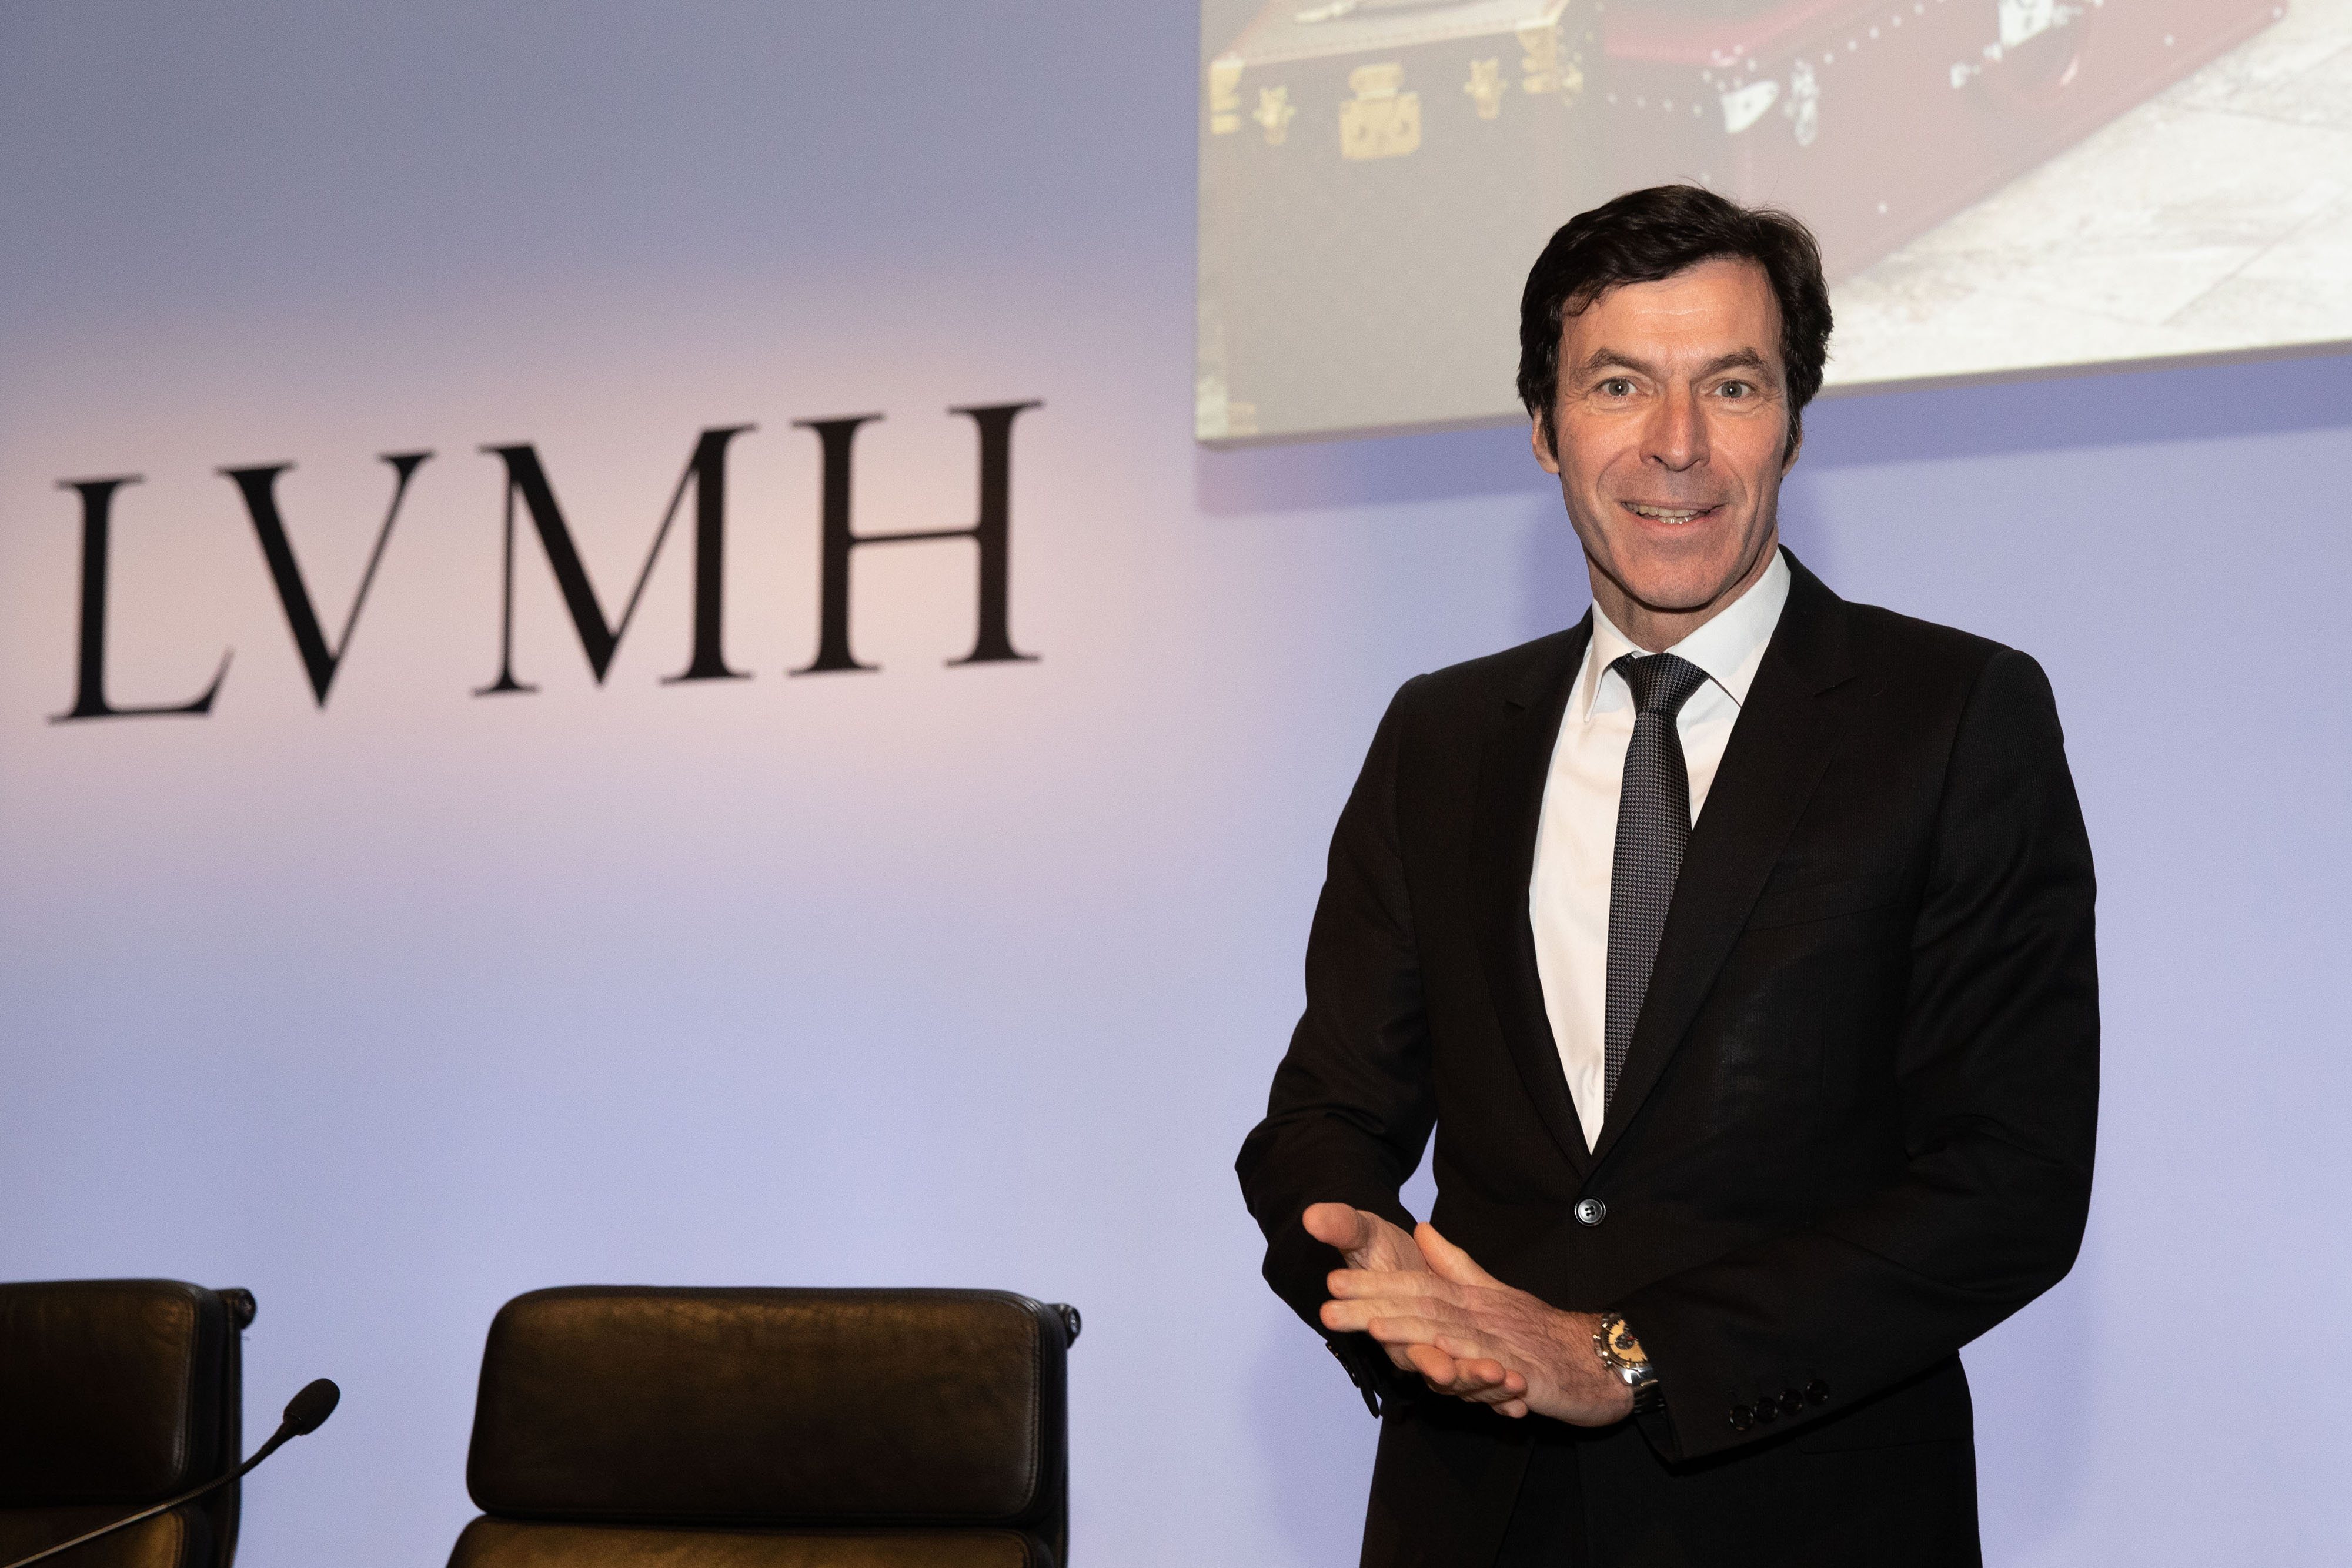 Constraints are what drive innovation: LVMH luxury group